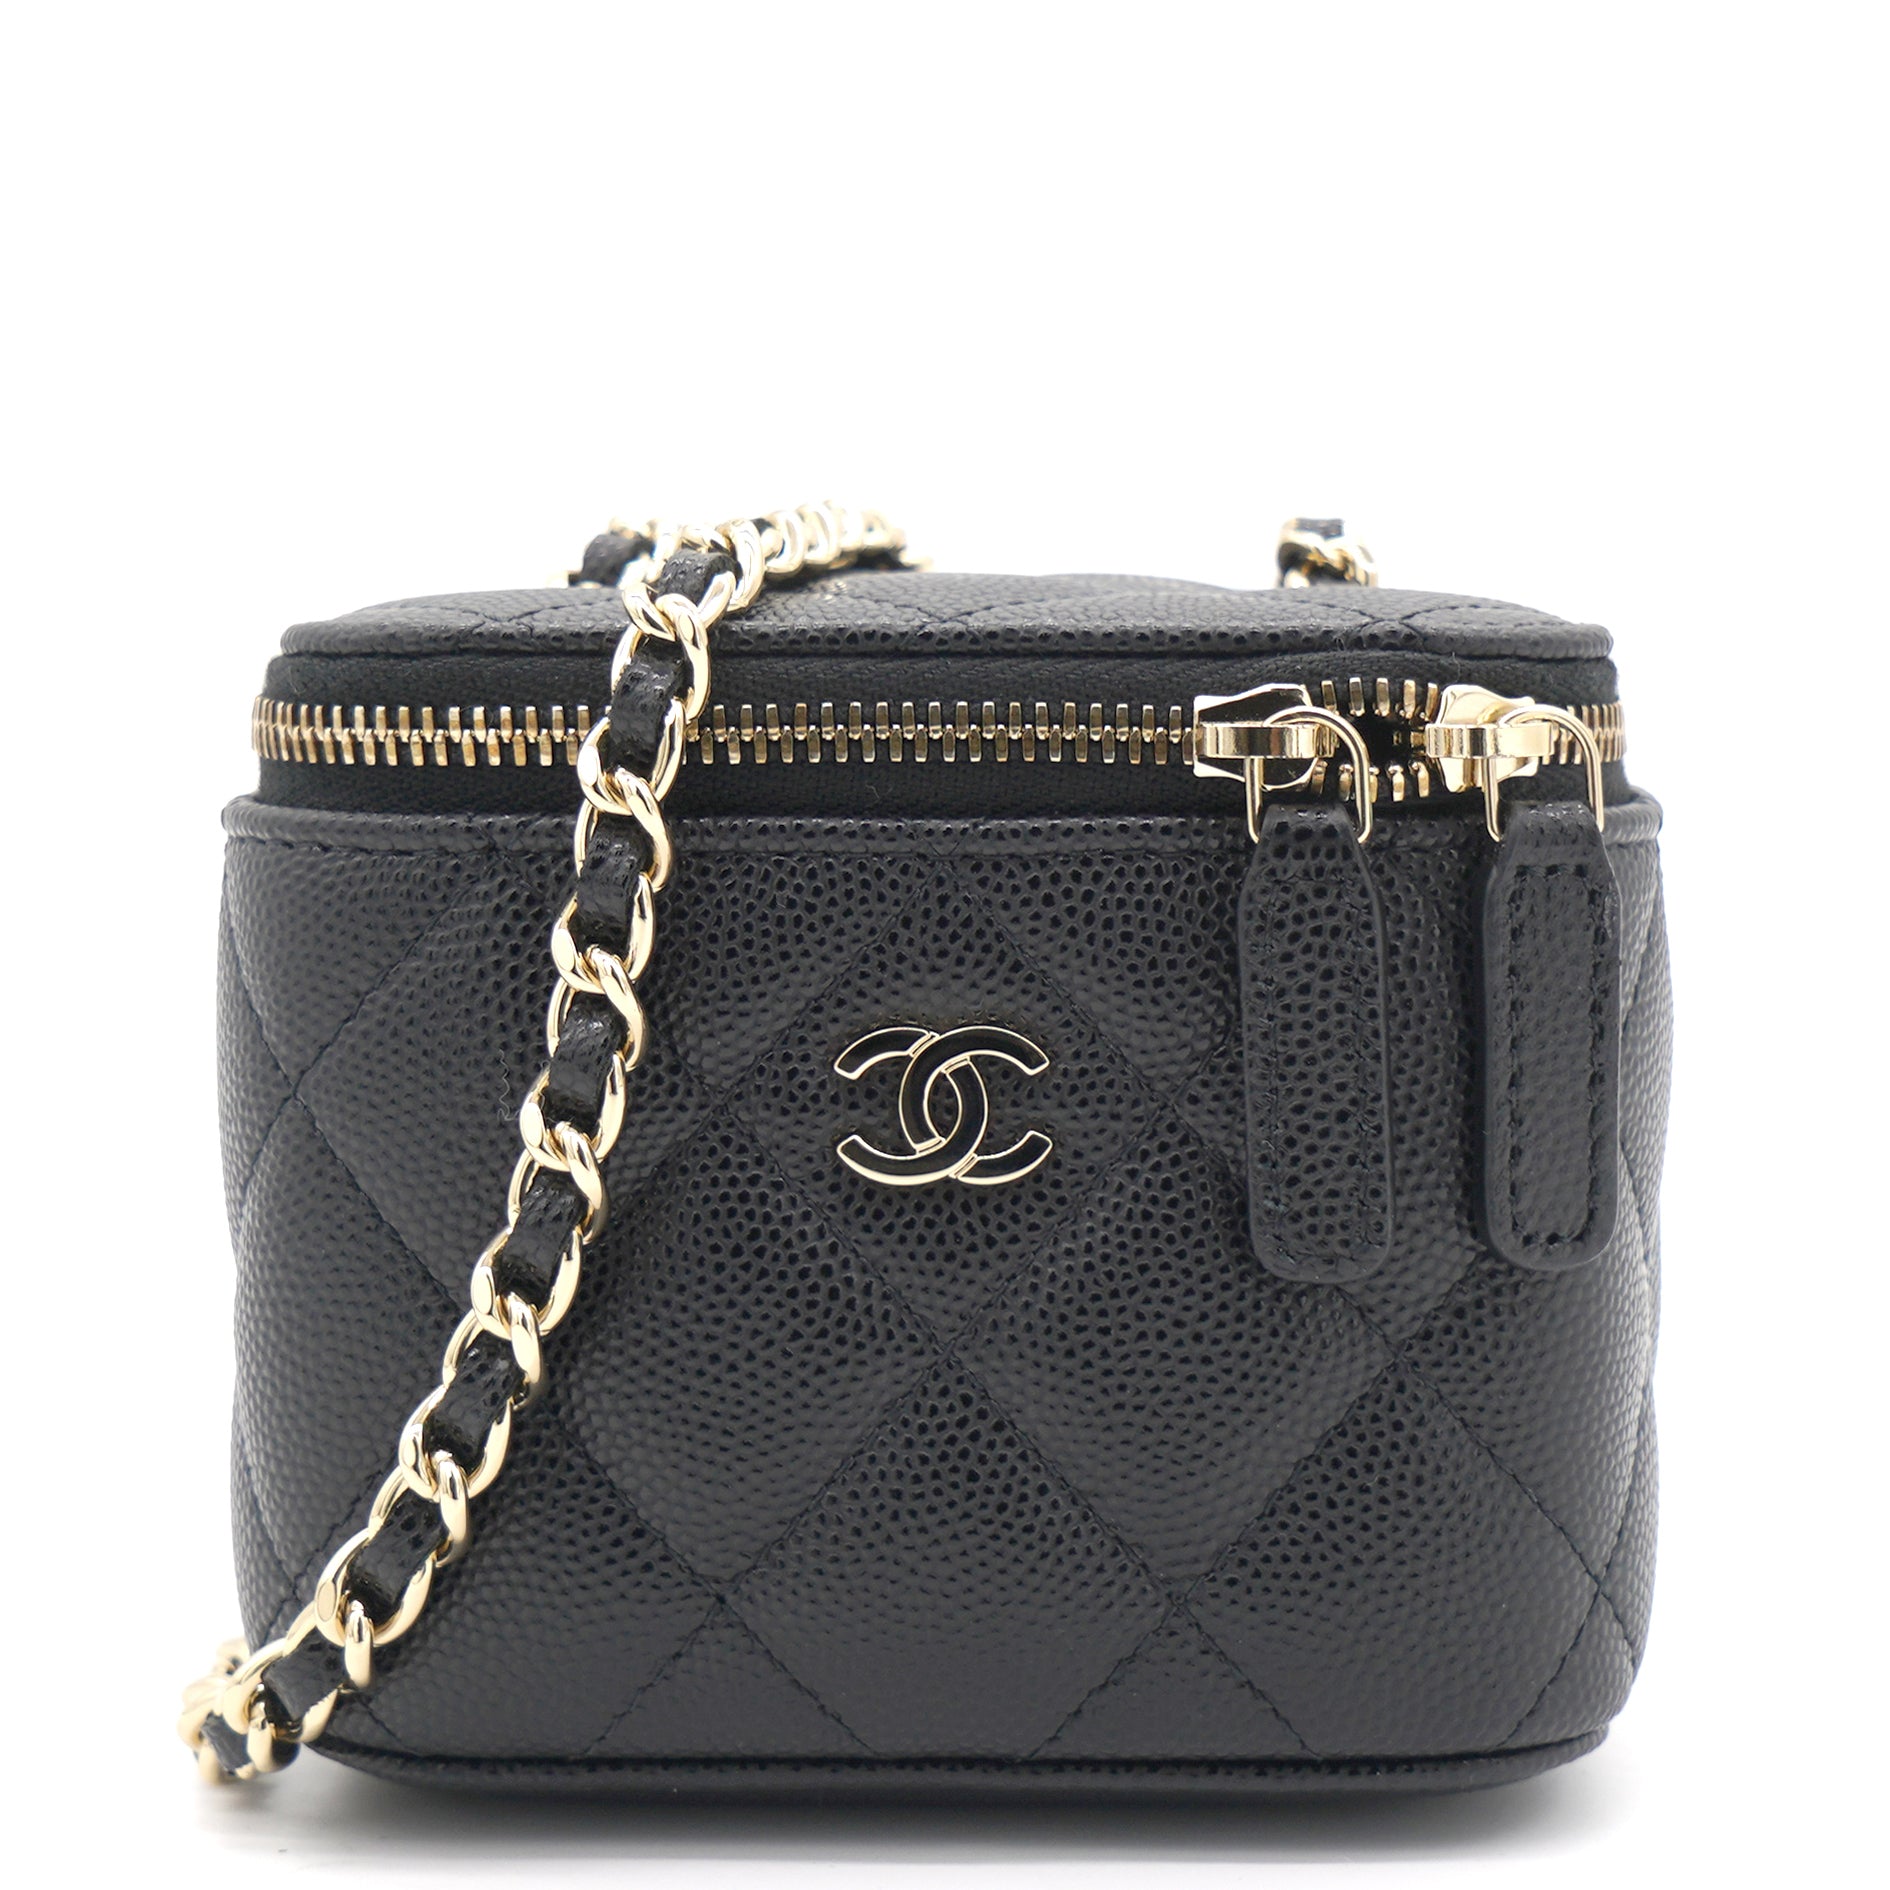 CHANEL  Bags  Chanel Classic Box With Chain  Poshmark